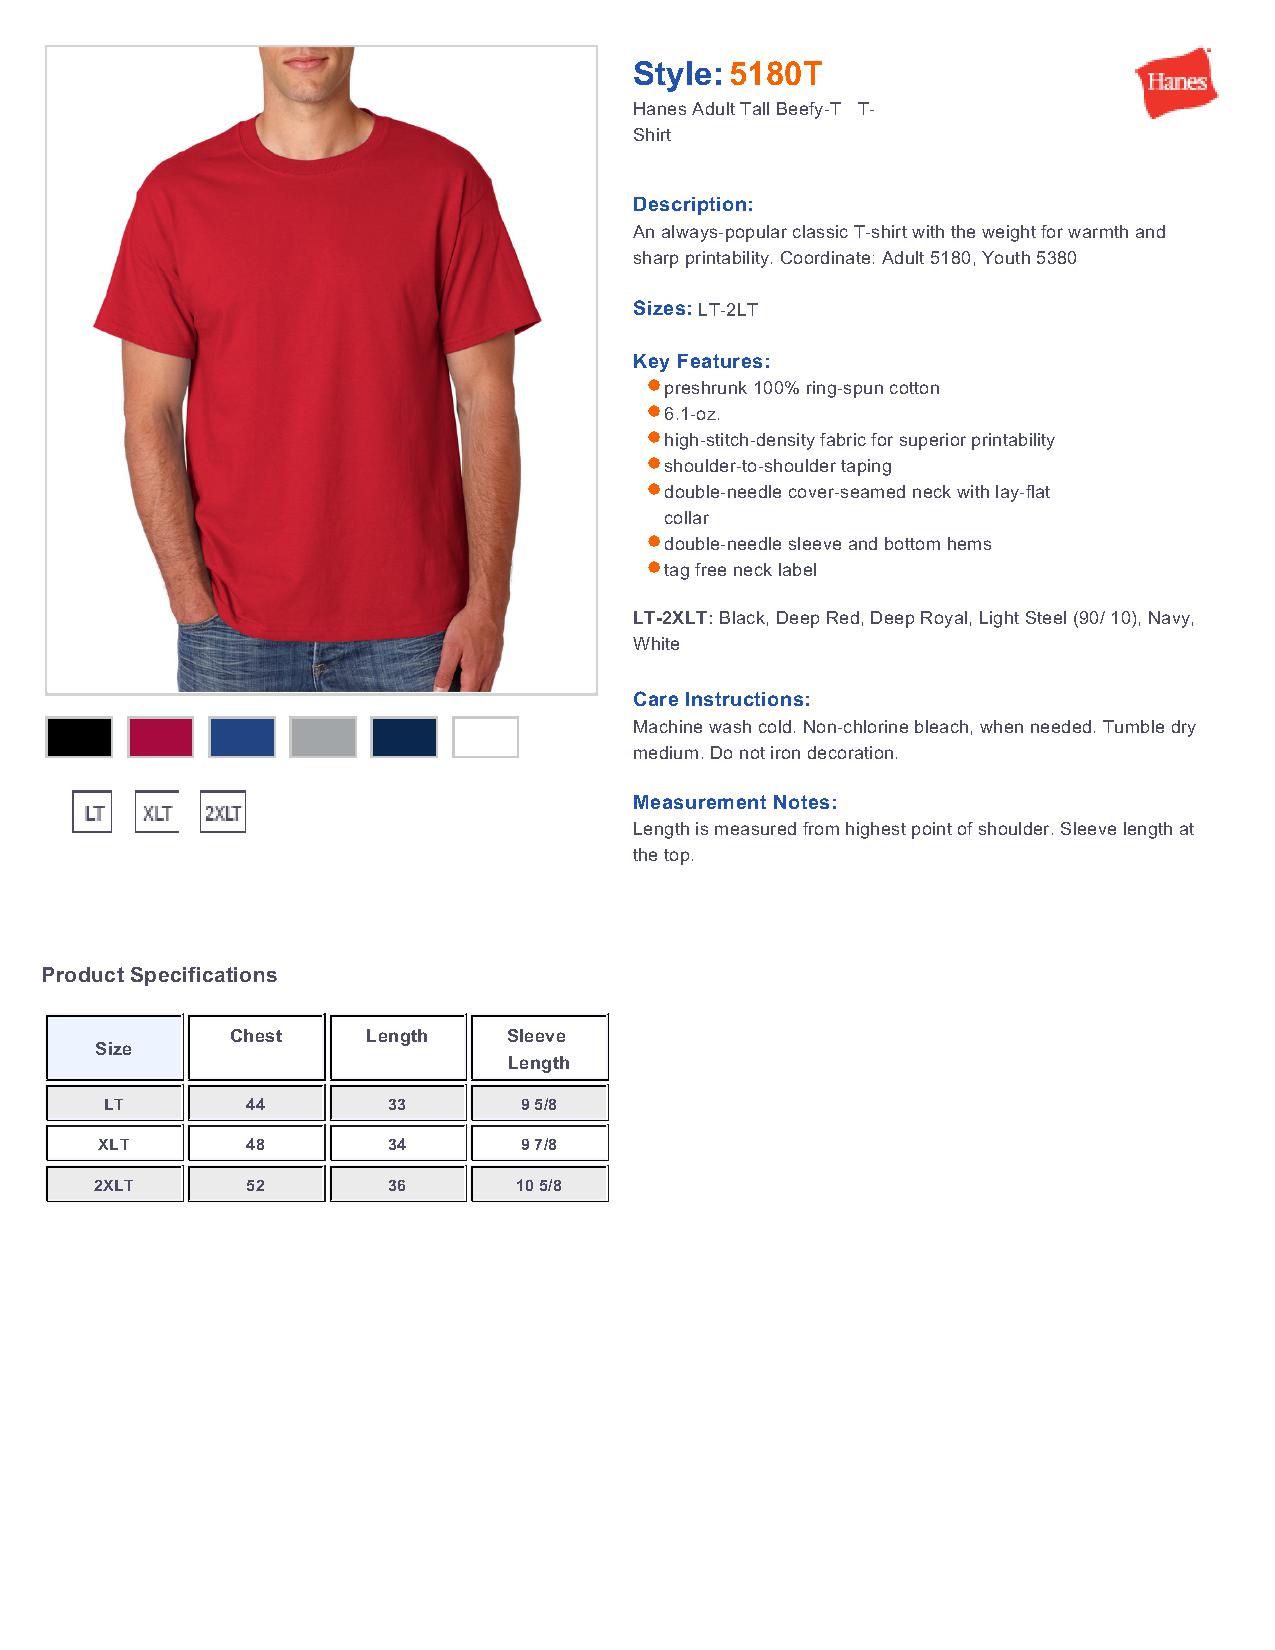 Hanes 5180T - Adult Tall Beefy-T T-Shirt $6.45 - T-Shirts